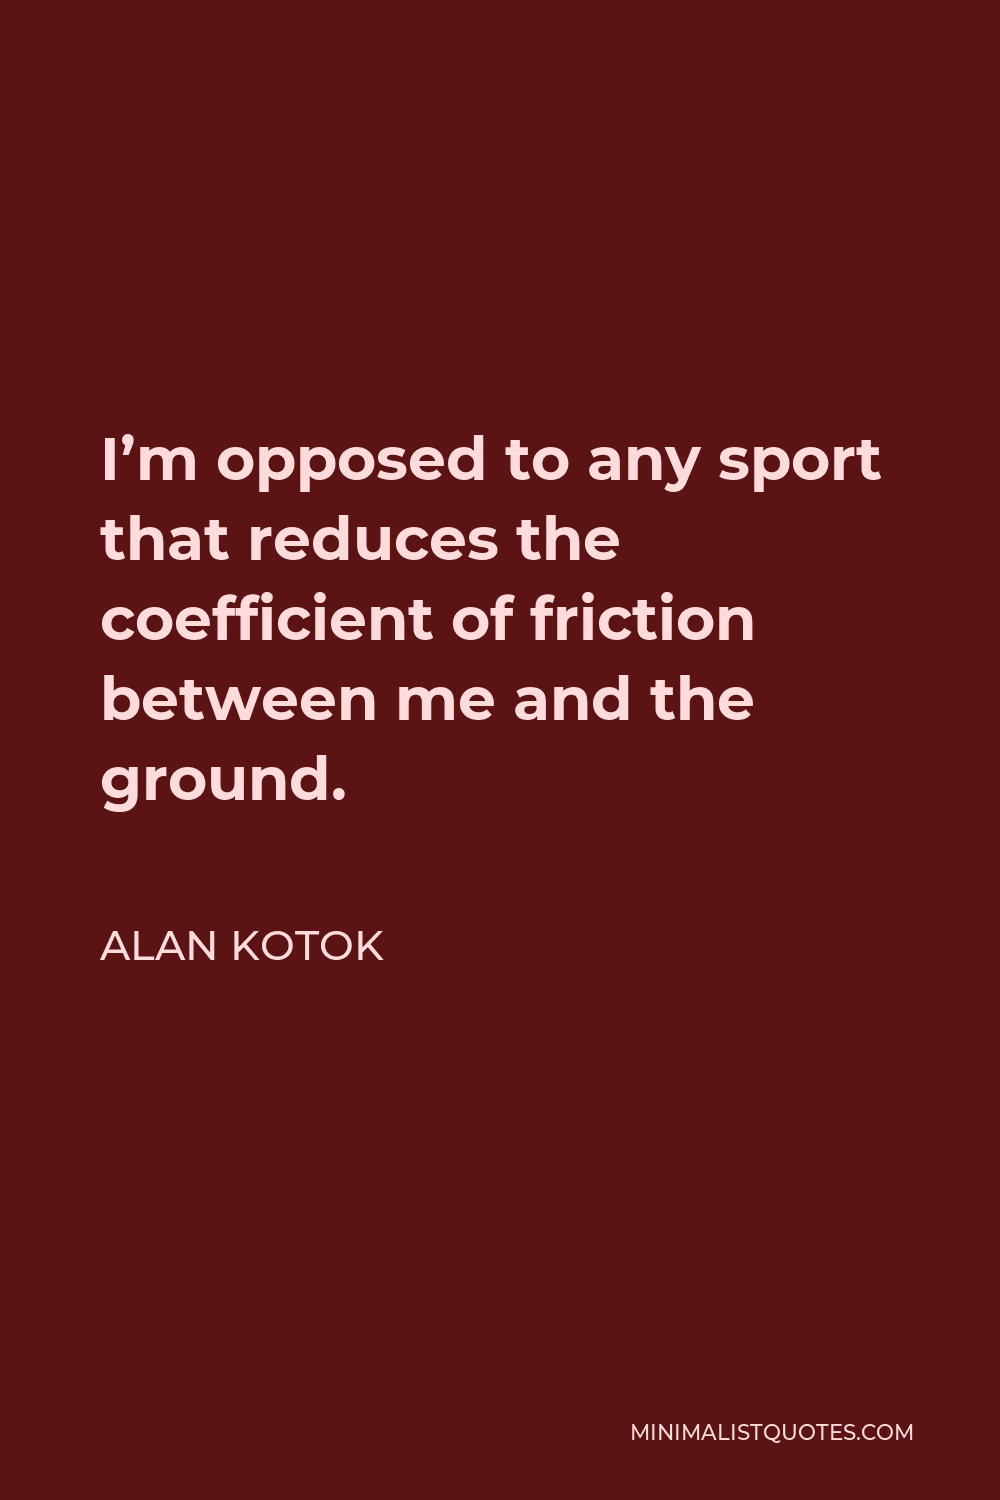 Alan Kotok Quote - I’m opposed to any sport that reduces the coefficient of friction between me and the ground.